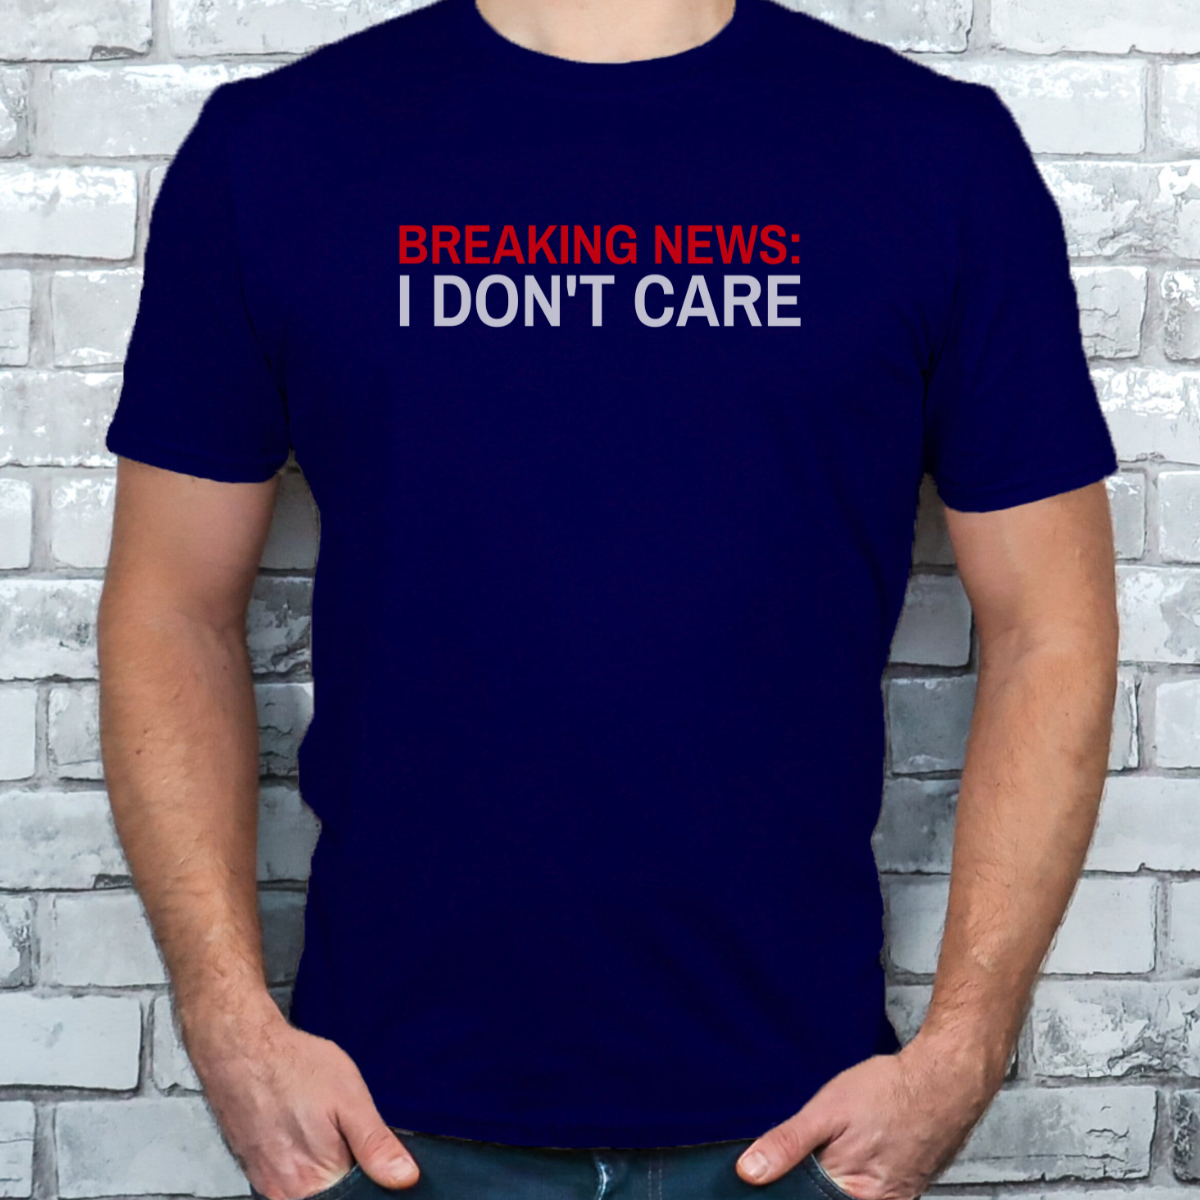 Breaking News: I Don't Care Tee